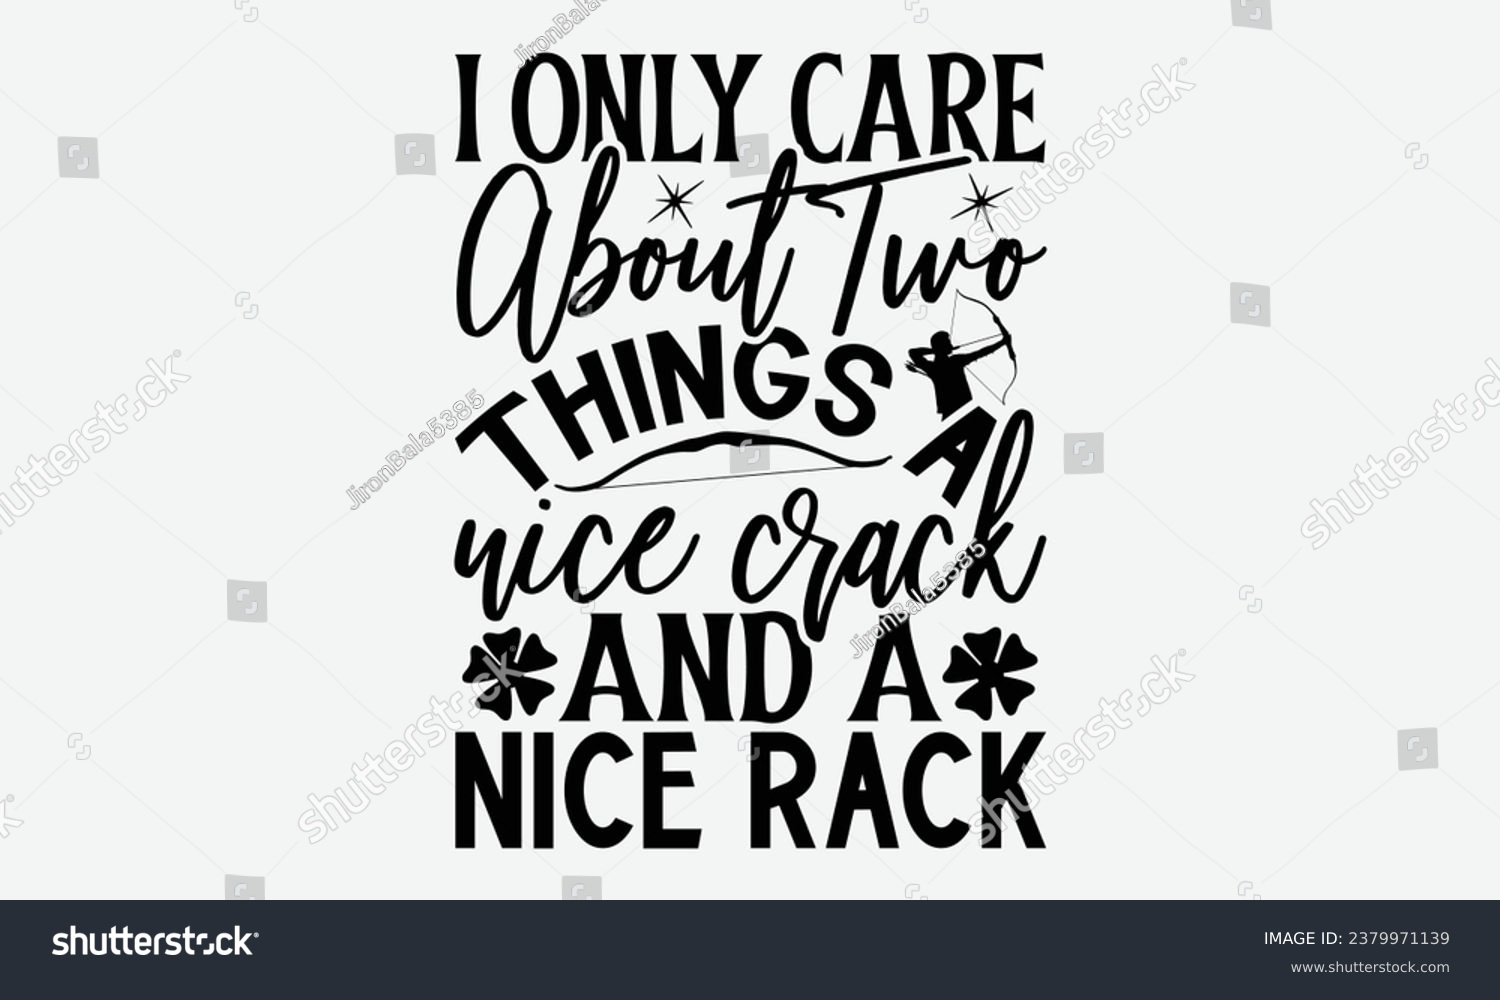 SVG of I Only Care About Two Things A Nice Crack And A Nice Rack - Camping  t-shirt Design, Calligraphy graphic design, Illustration for prints on t-shirts, bags, posters, cards and Mug. svg